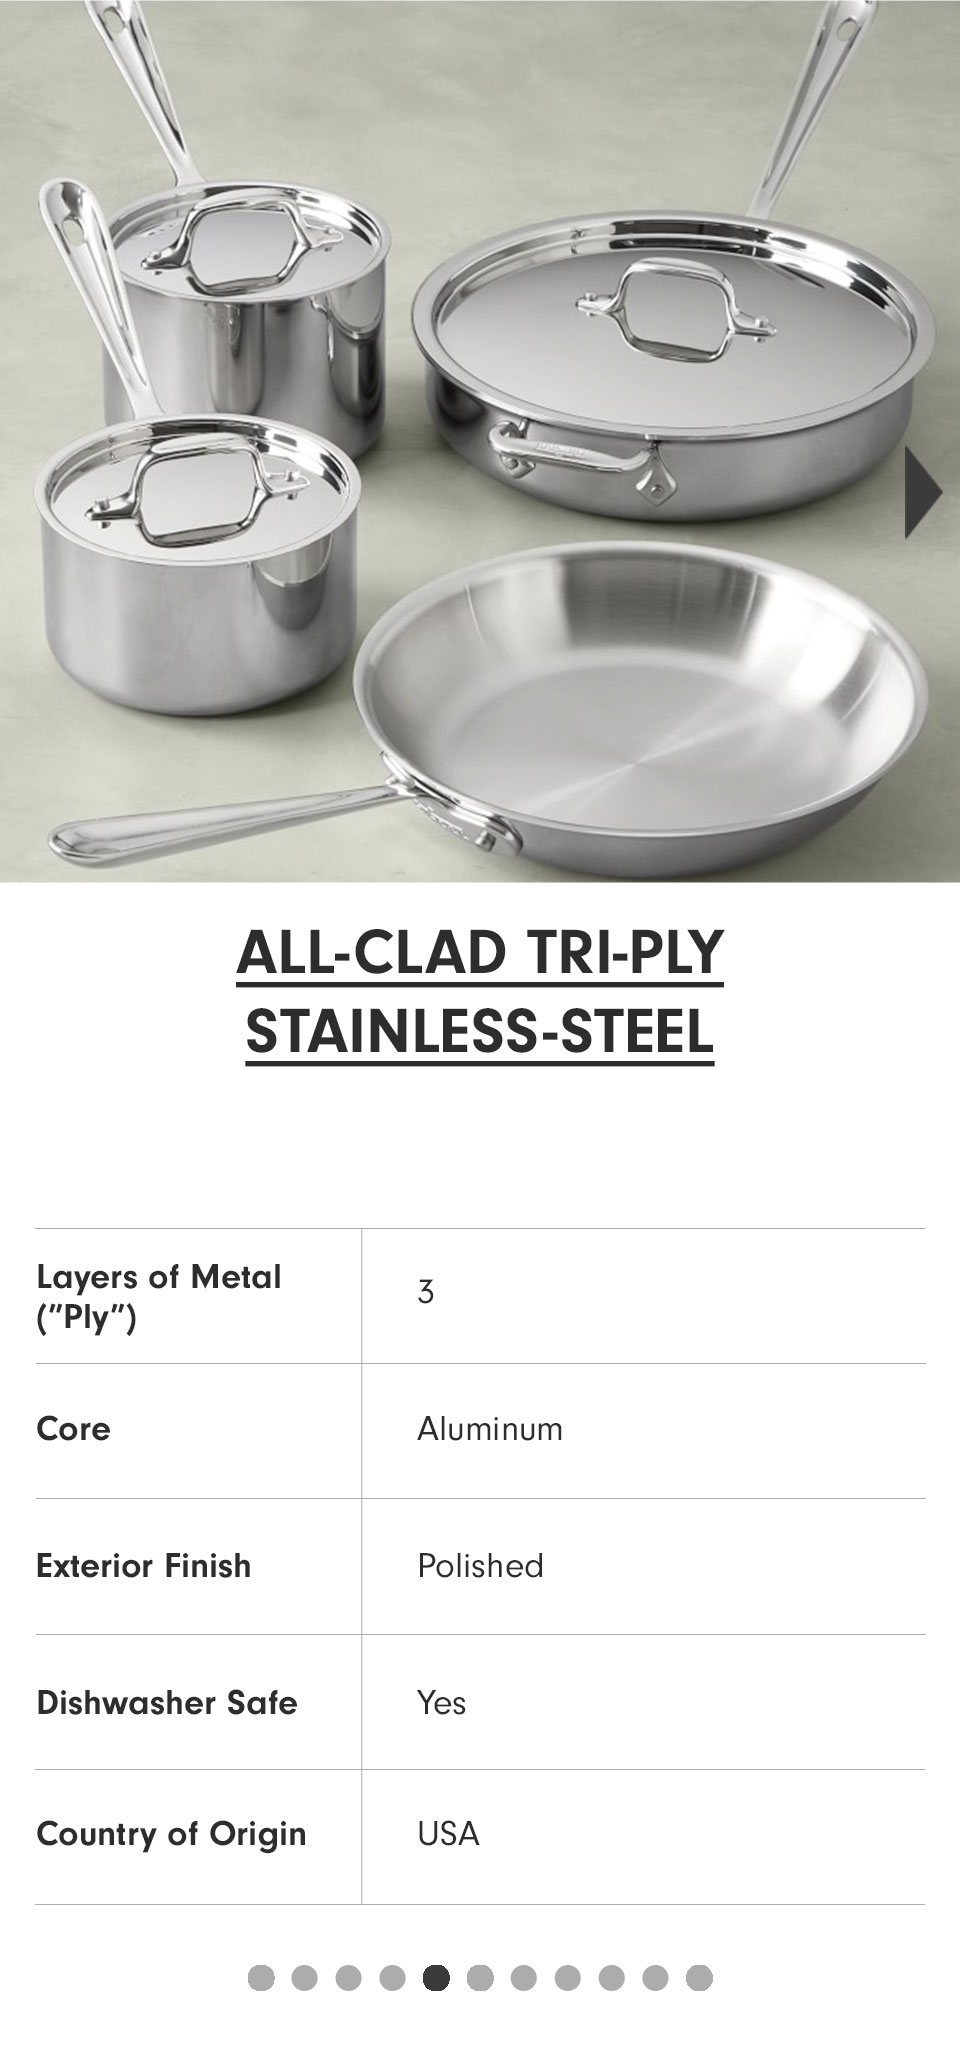 All-Clad Tri-Ply Stainless-Steel >